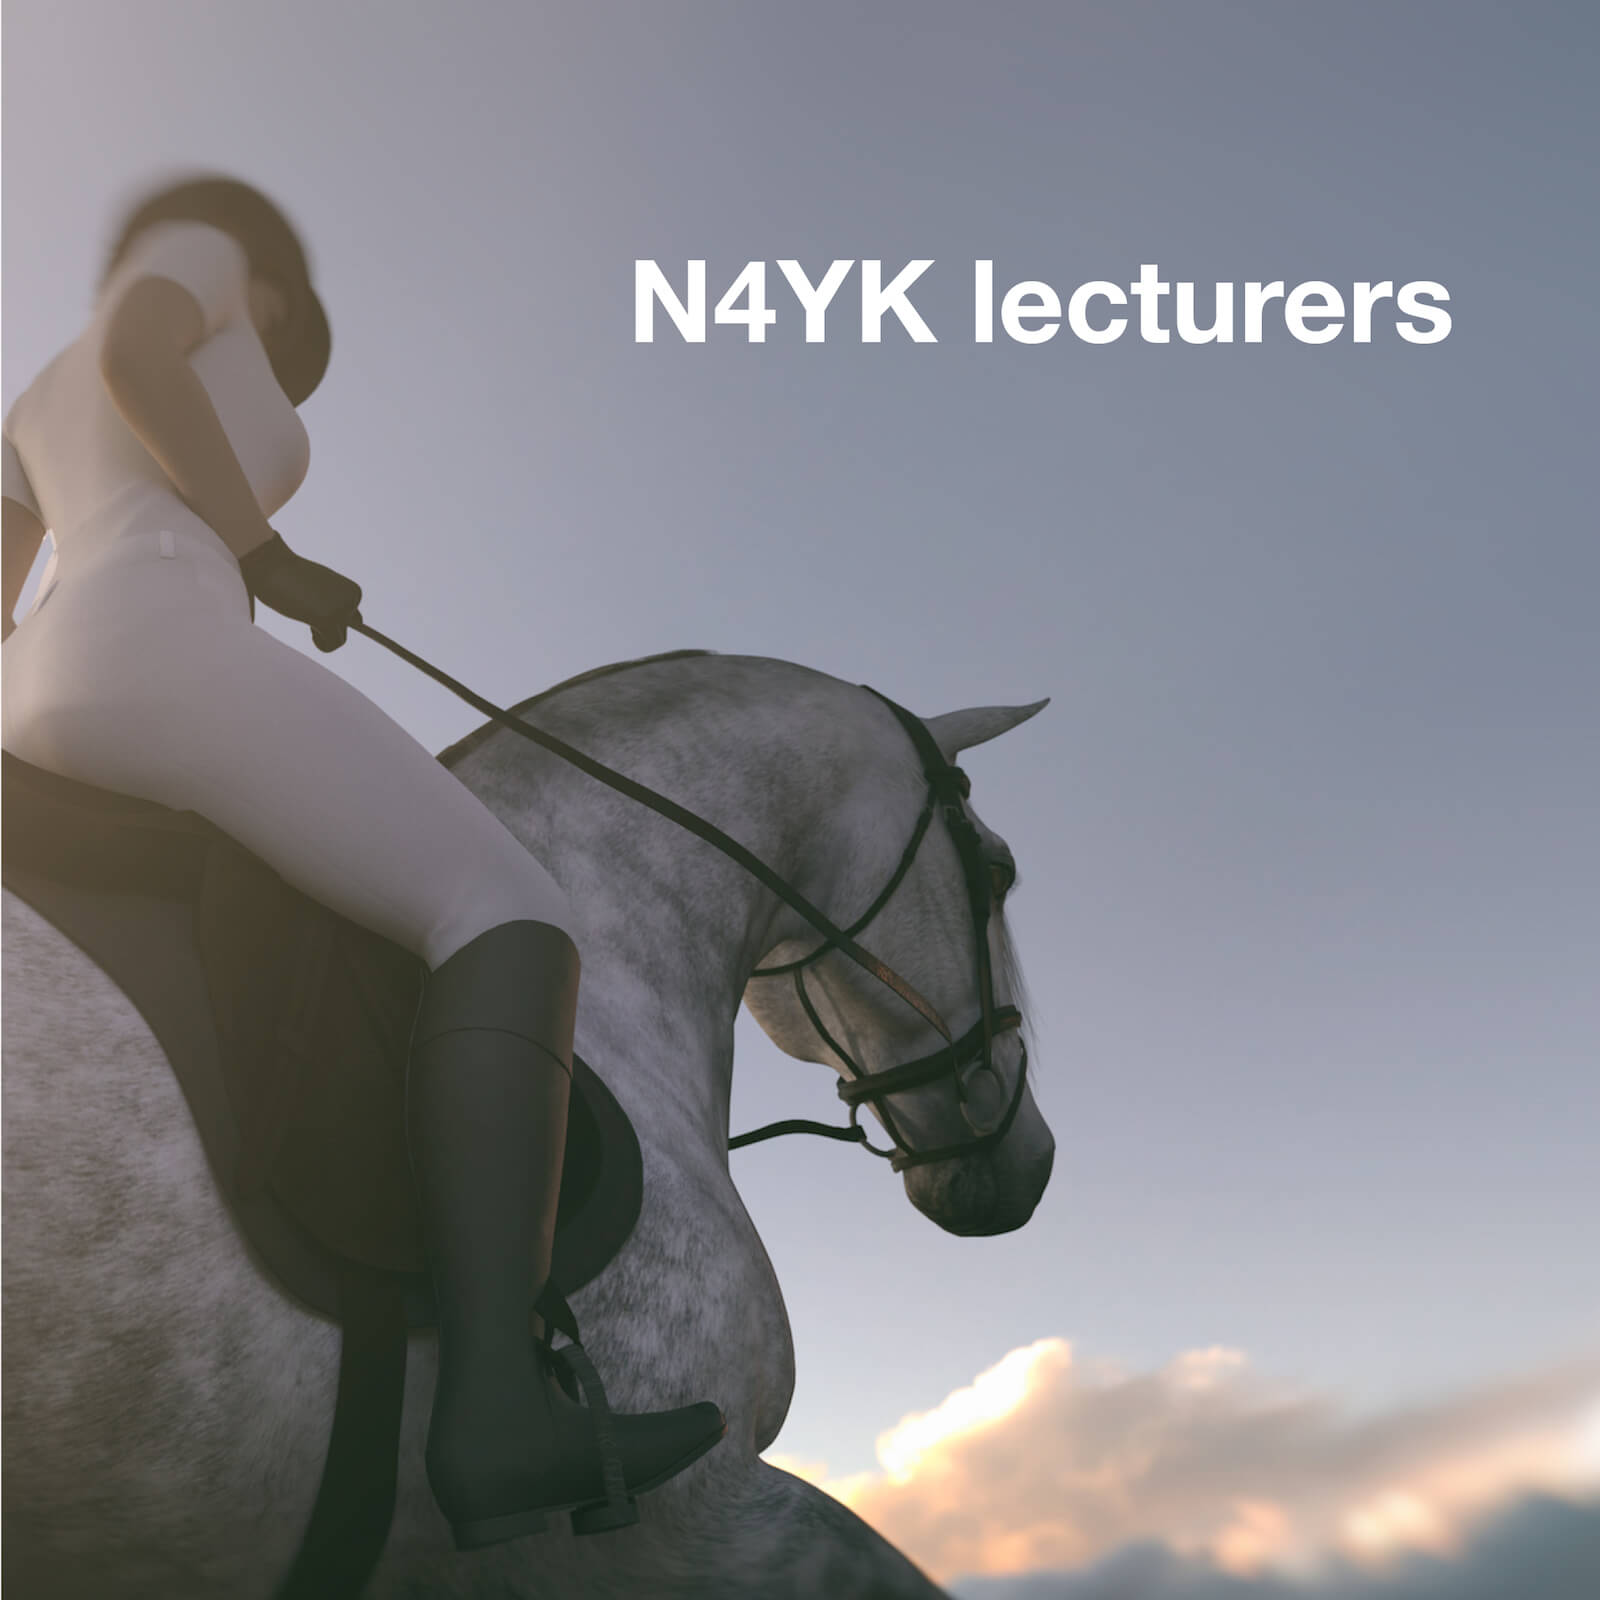 professional and qualified lecturers at N4YK